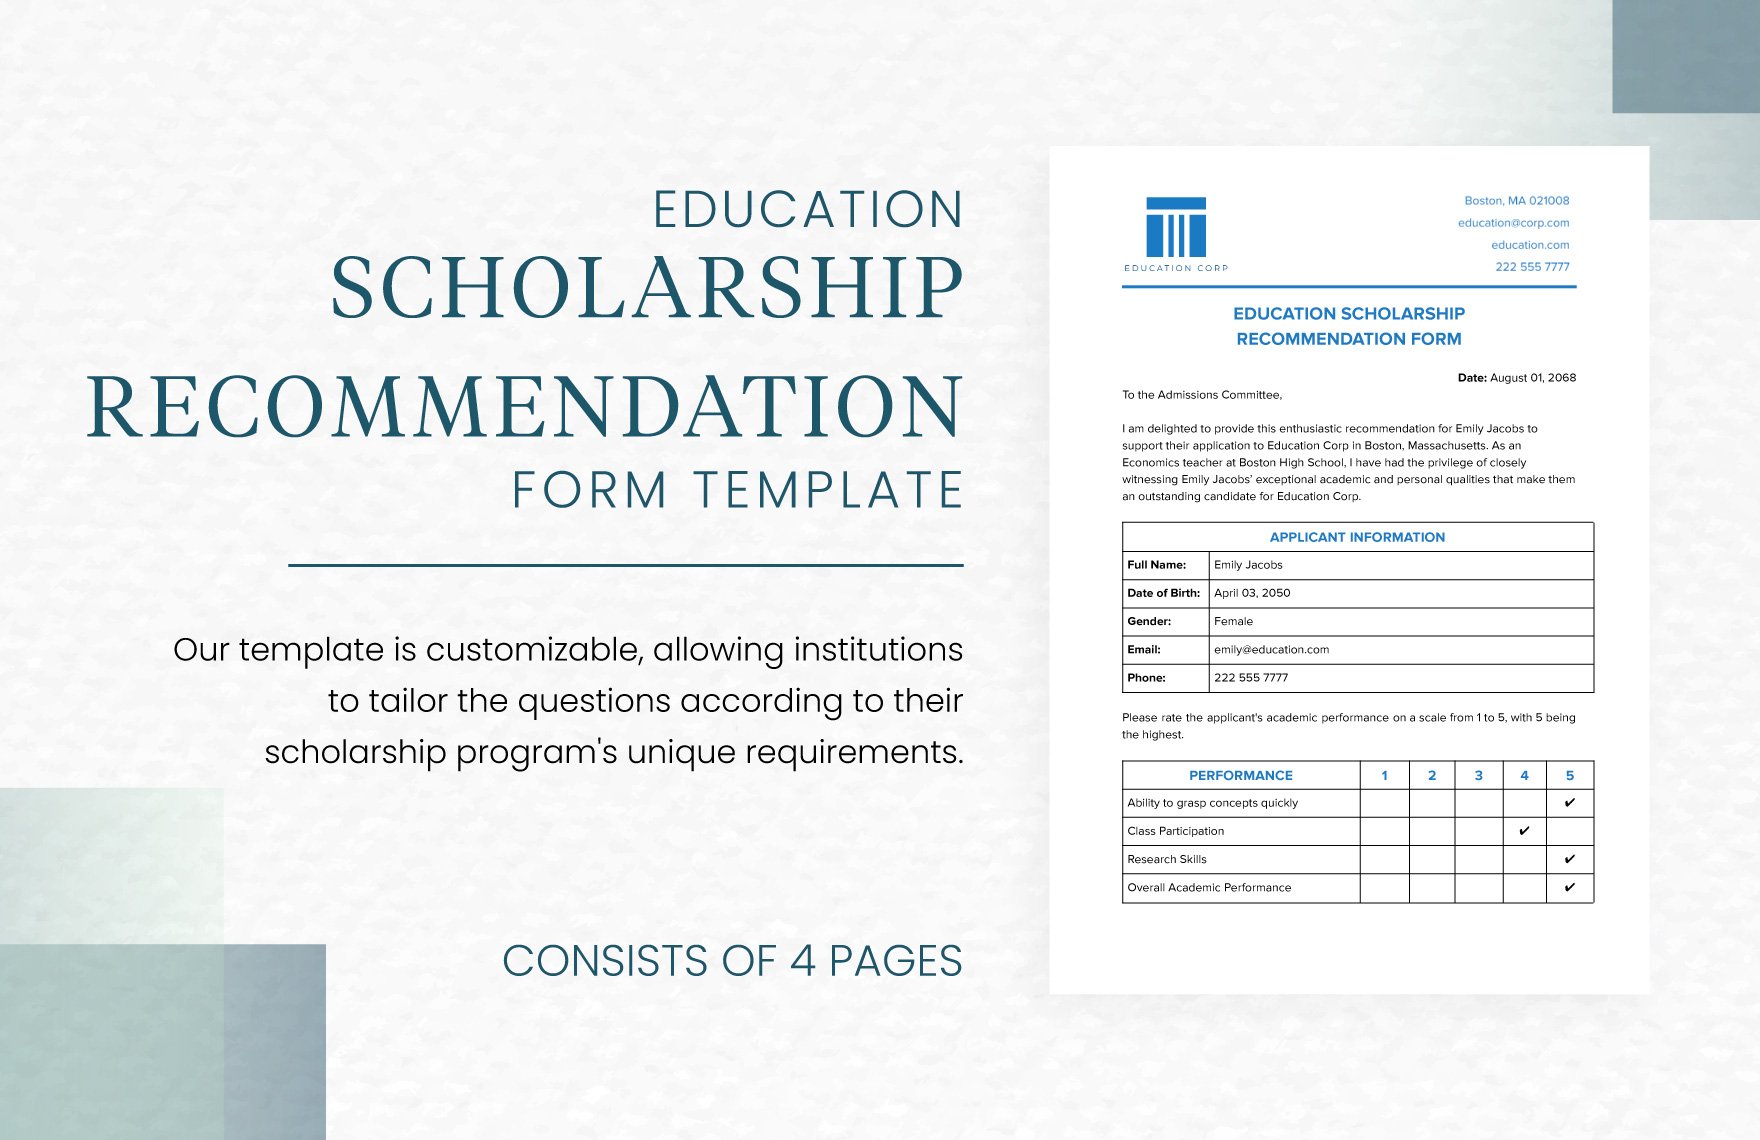 Education Scholarship Recommendation Form Template in Word, Google Docs, PDF